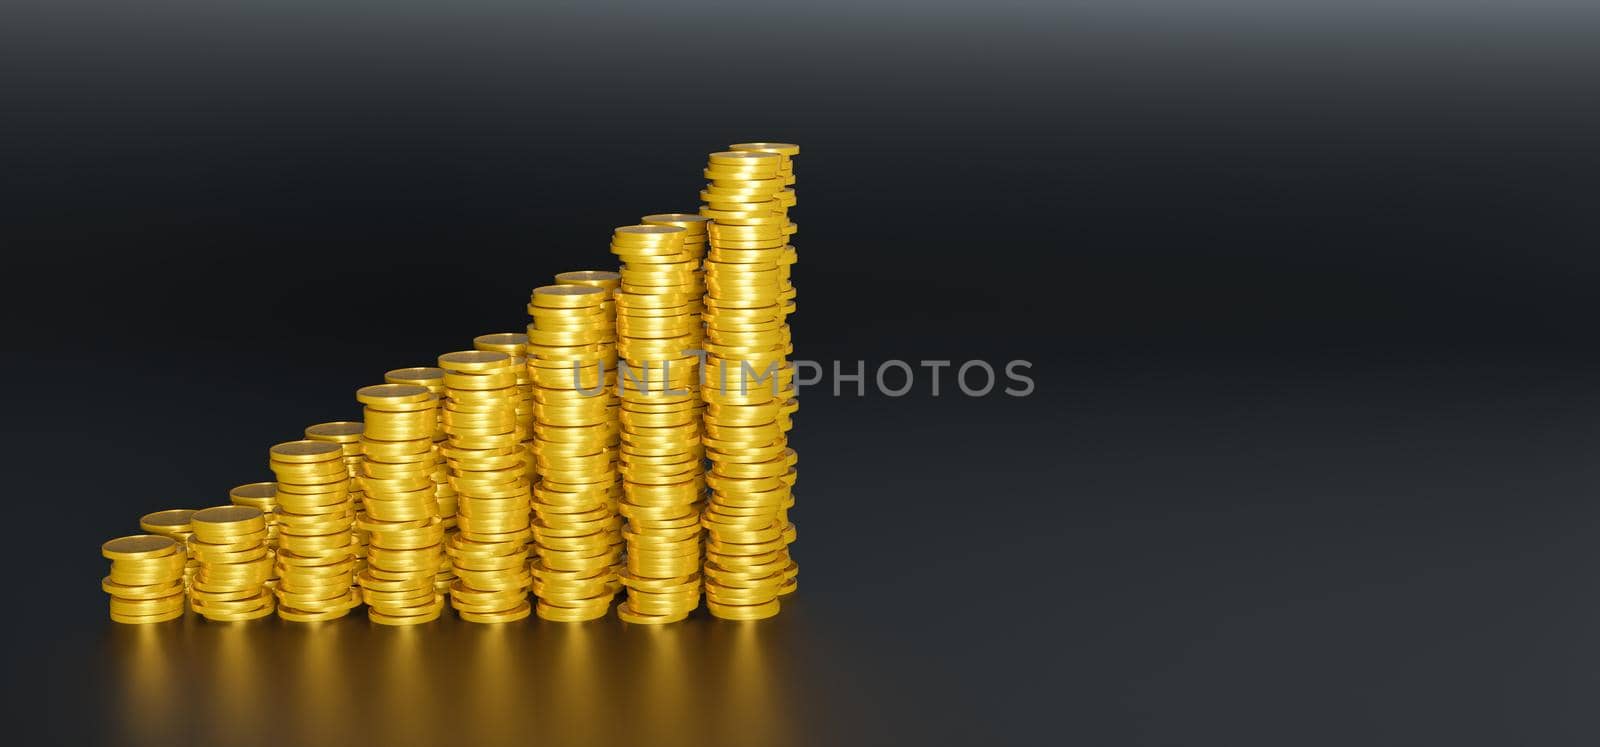 rising mountain of gold coins on black background by asolano